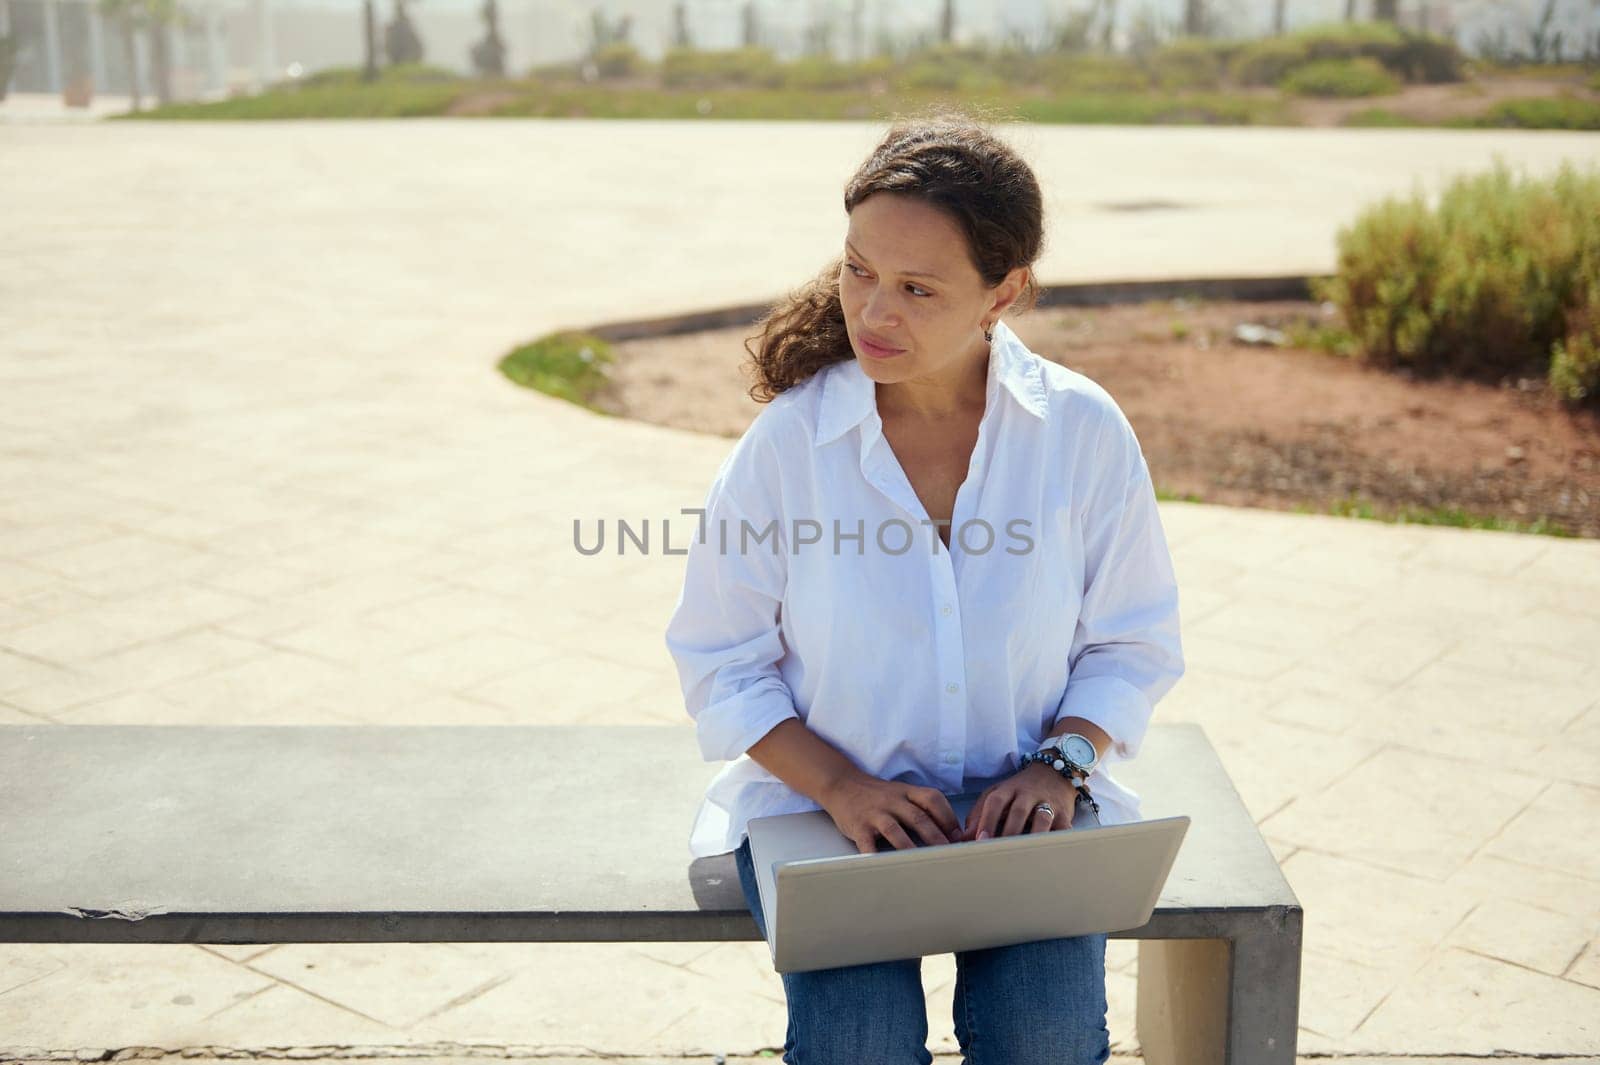 Confident pensive business woman thinking on new startup project, online working on laptop, sitting on bench outdoors and dreamily looking to the side. Remote job. People. Career. Distance work